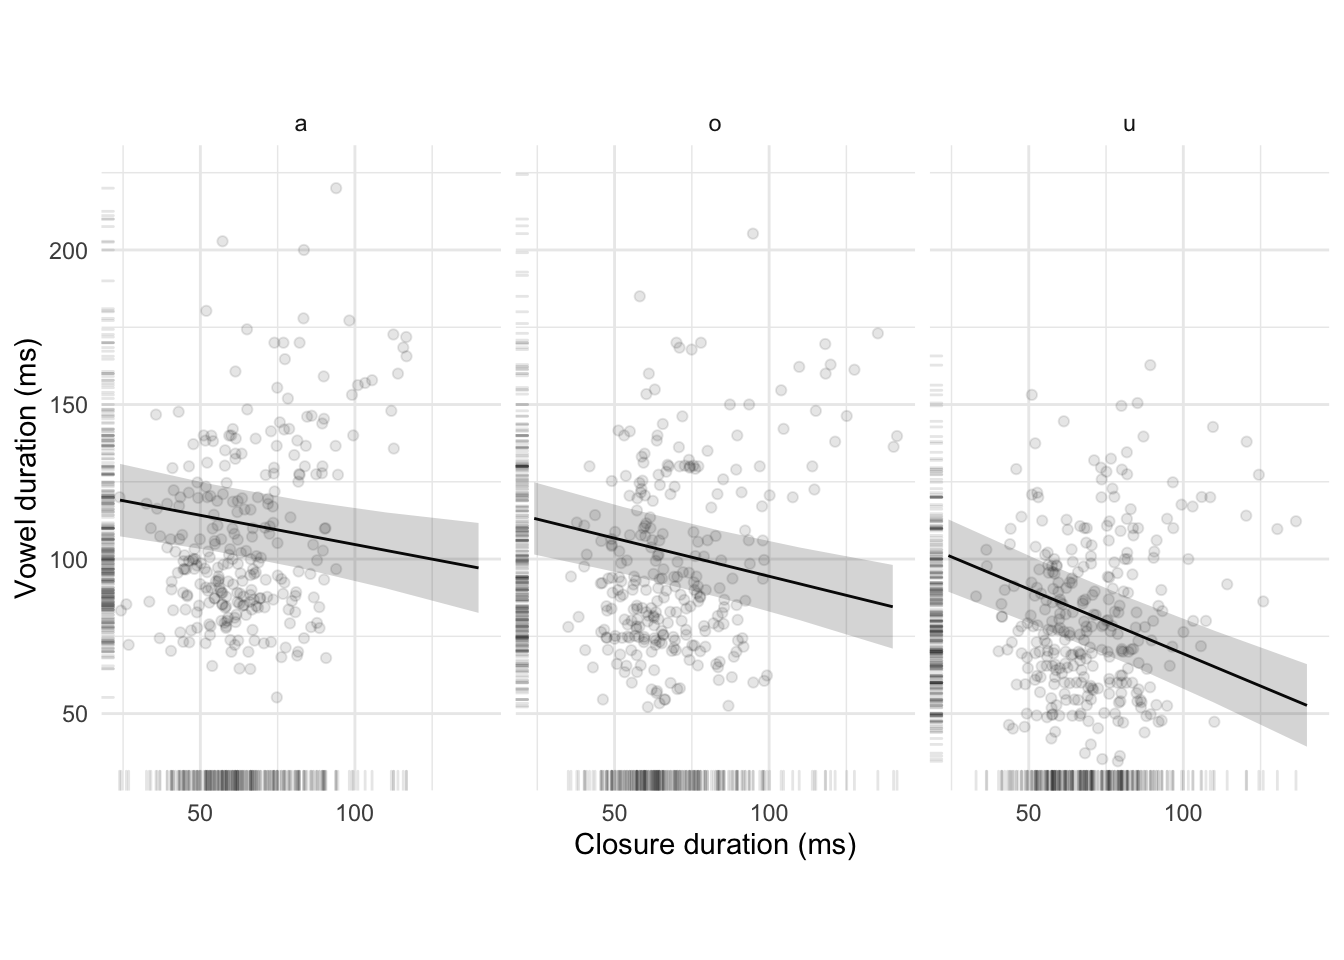 Raw data, estimated regression lines, and 95 per cent confidence intervals of the effect of closure duration on vowel duration for the vowels /a, o, u/ (from a mixed-effects model fitted to data pooled from Italian and Polish, see text for details).